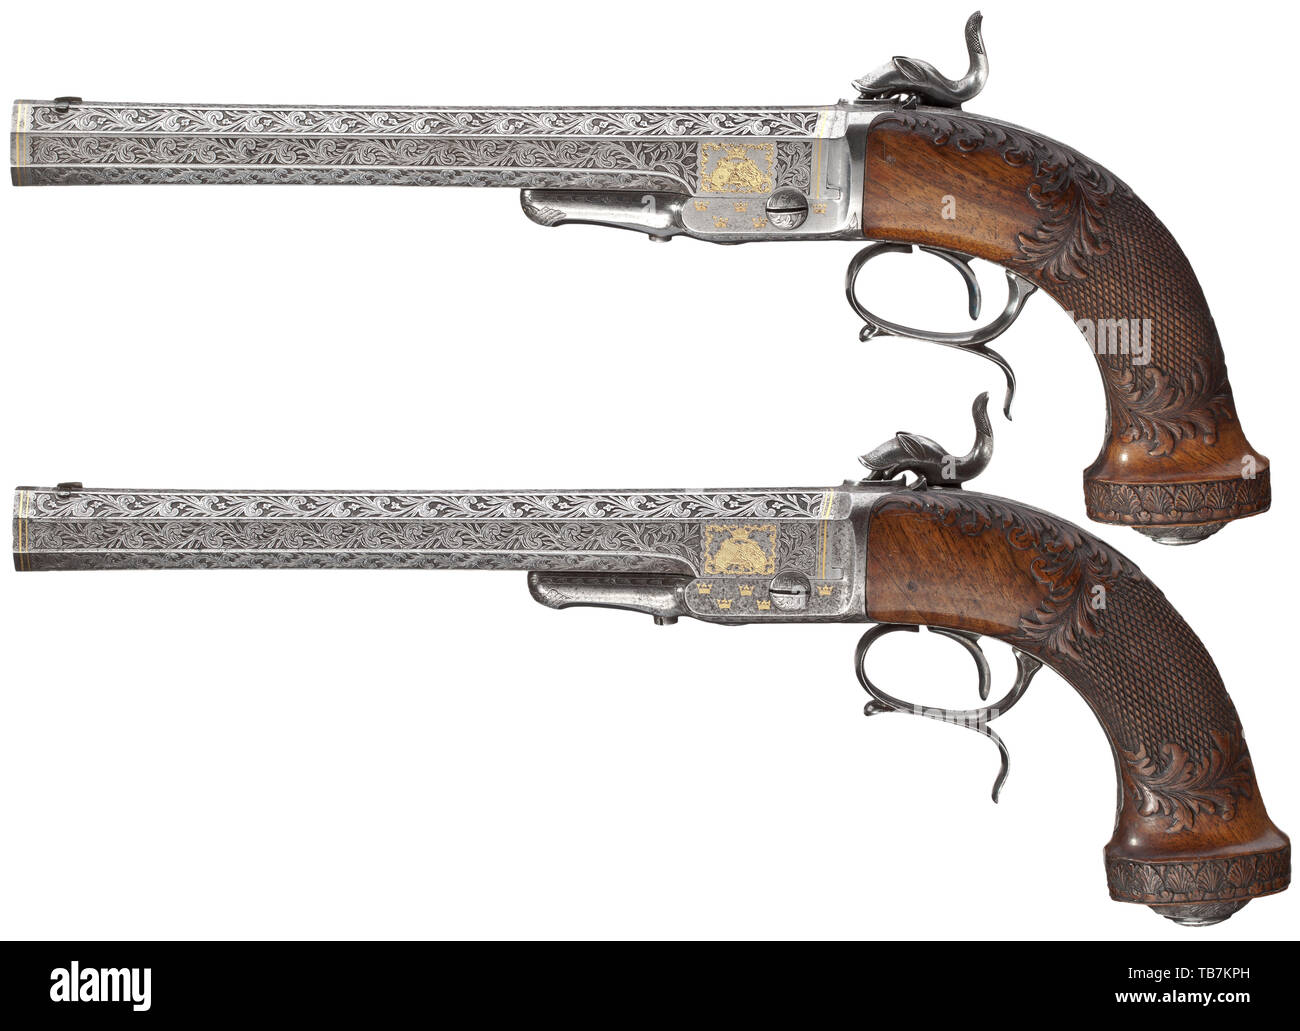 King Oscar II of Sweden (1829 - 1907) - a pair of percussion pistols, Husquarna, mid-19th century, Heavy, concavely rifled octagonal barrels, laterally swivelling for loading, in 16 mm calibre with smooth bores that are minimally rough at the muzzles. The barrels completely covered with lavish tendrils 19th century, Editorial-Use-Only Stock Photo